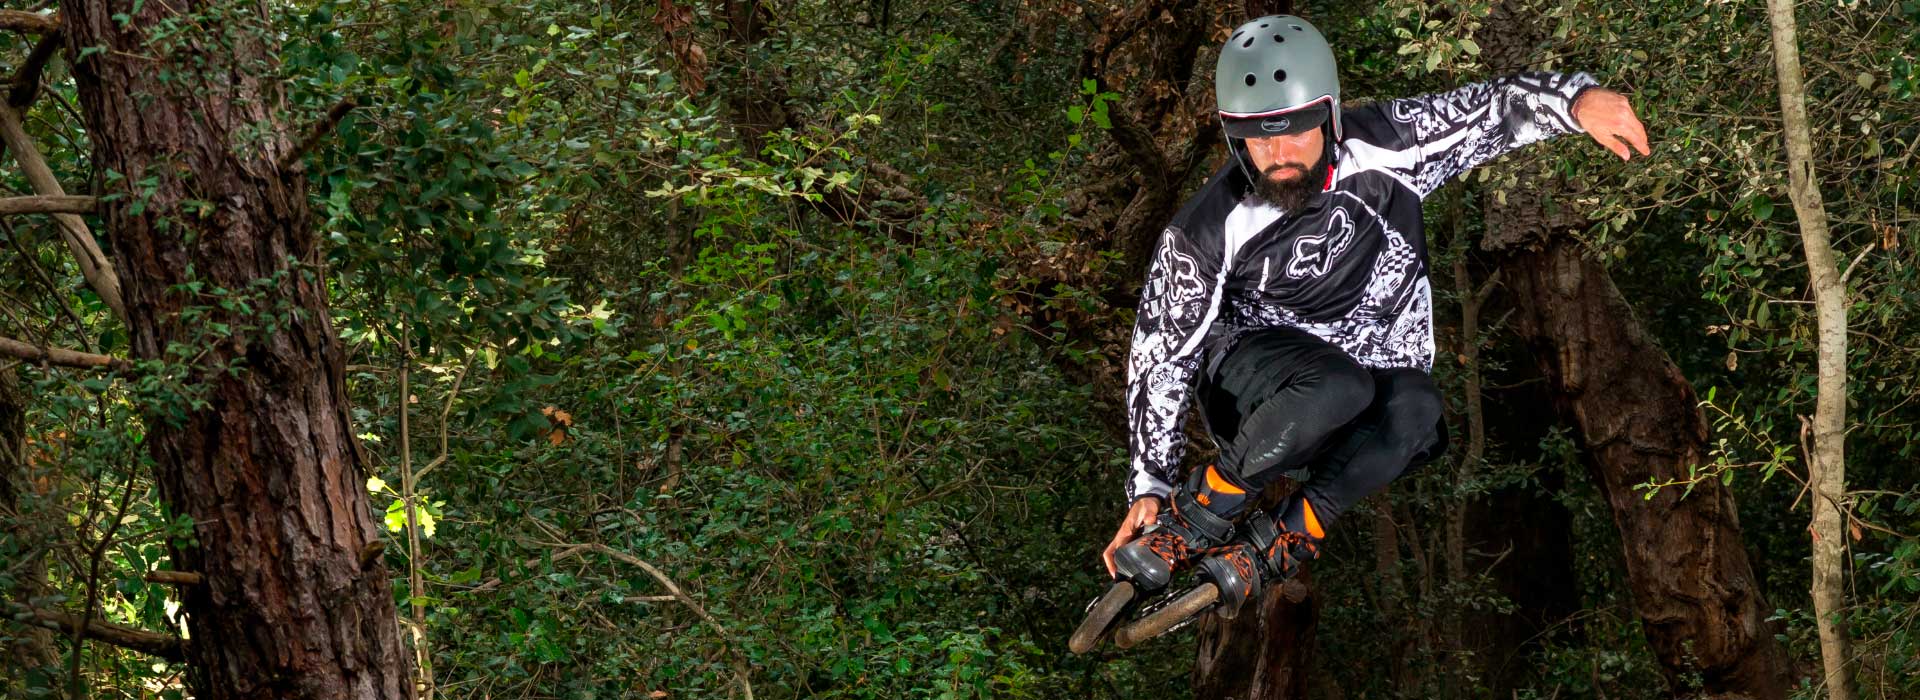 A person with a helmet gets big air on Powerslide SUV inline skates with a forest in the background